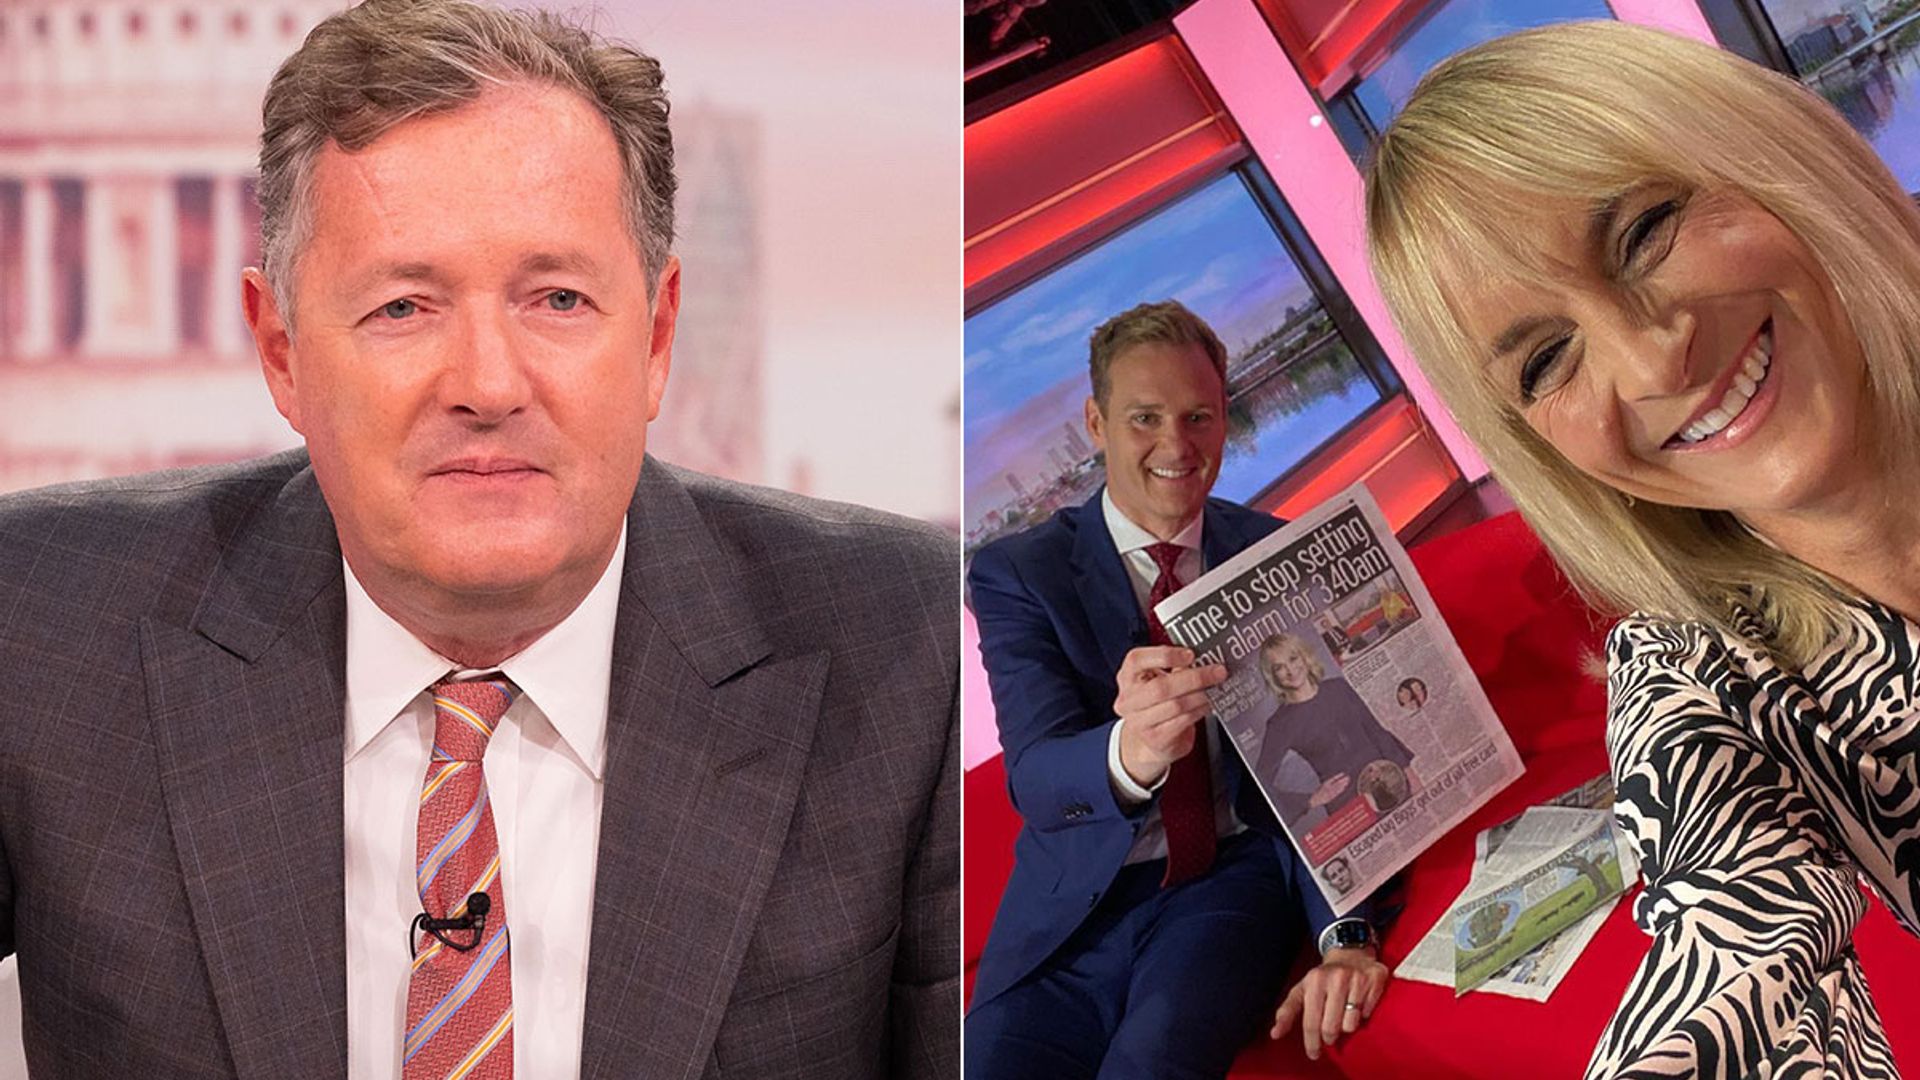 Piers Morgan's dig towards 'rival' Dan Walker after Louise Minchin quits BBC Breakfast revealed